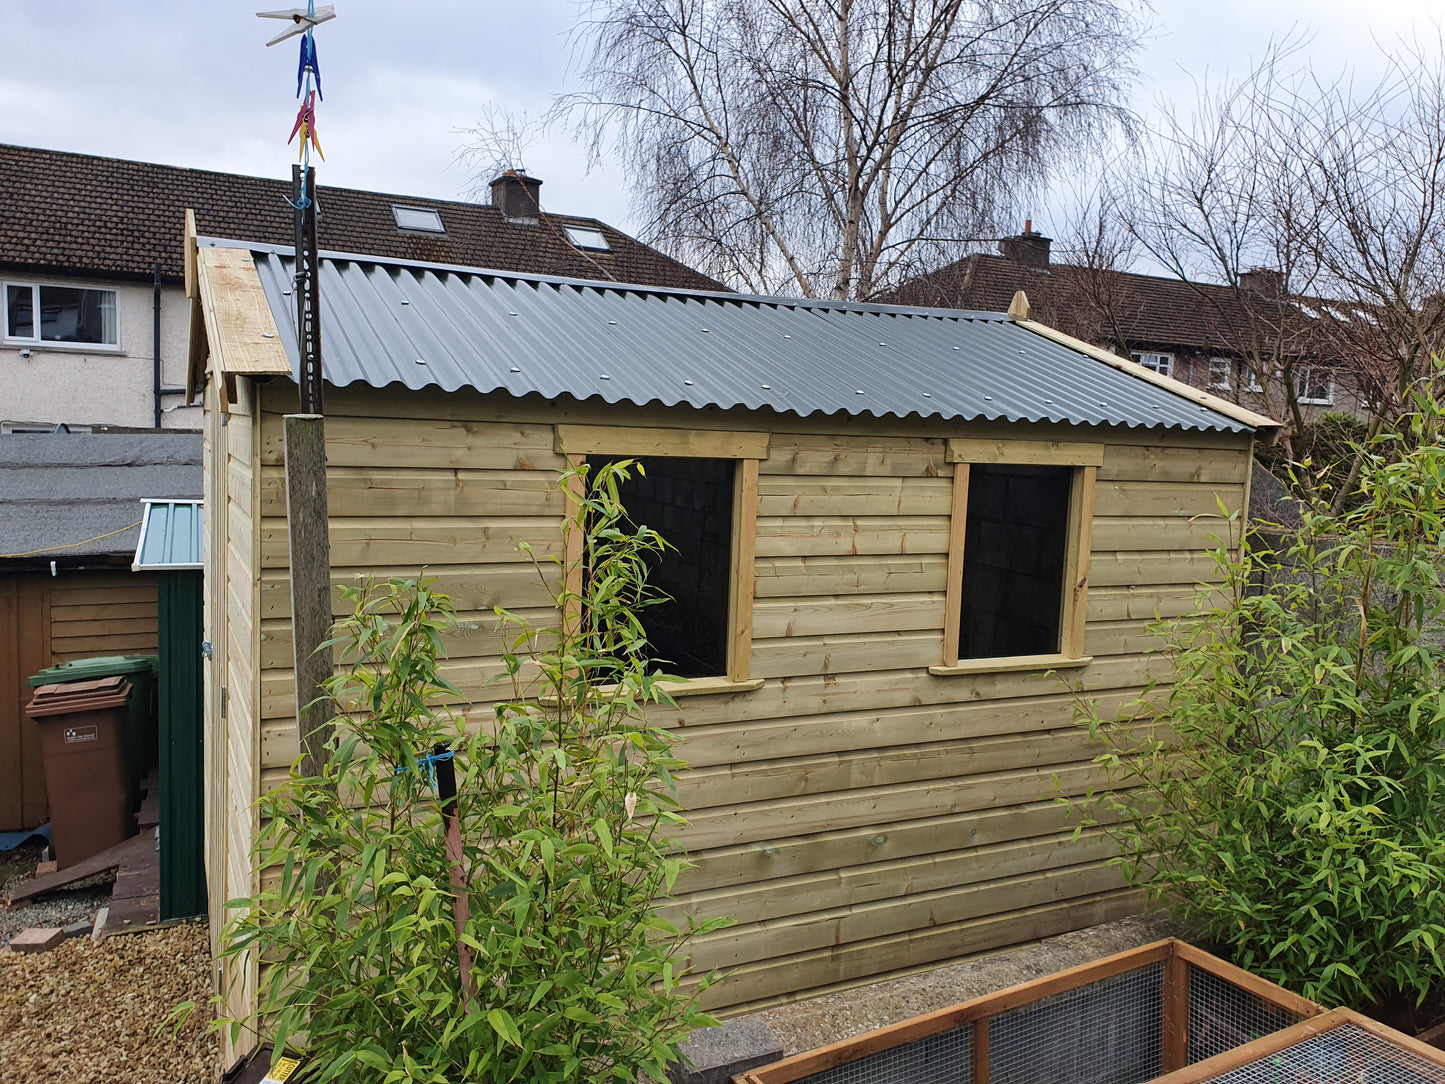 8ft x 8ft Shiplap Storm Force Shed